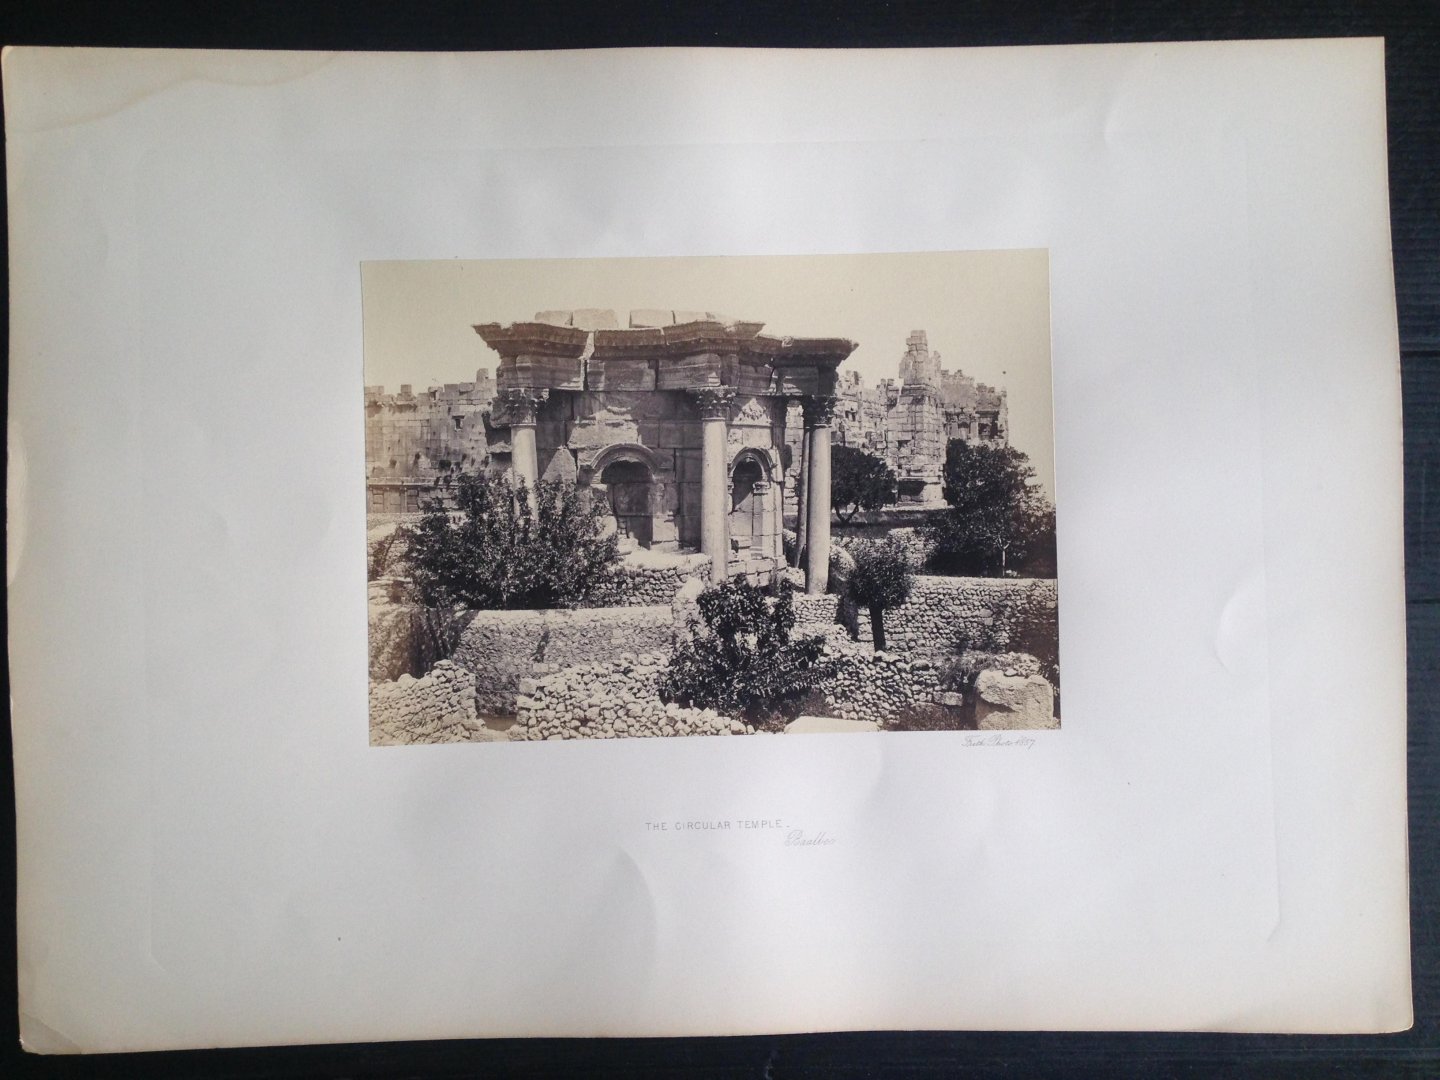 Frith, Francis - The Circular Temple, Baalbec, Series Egypt and Palestine